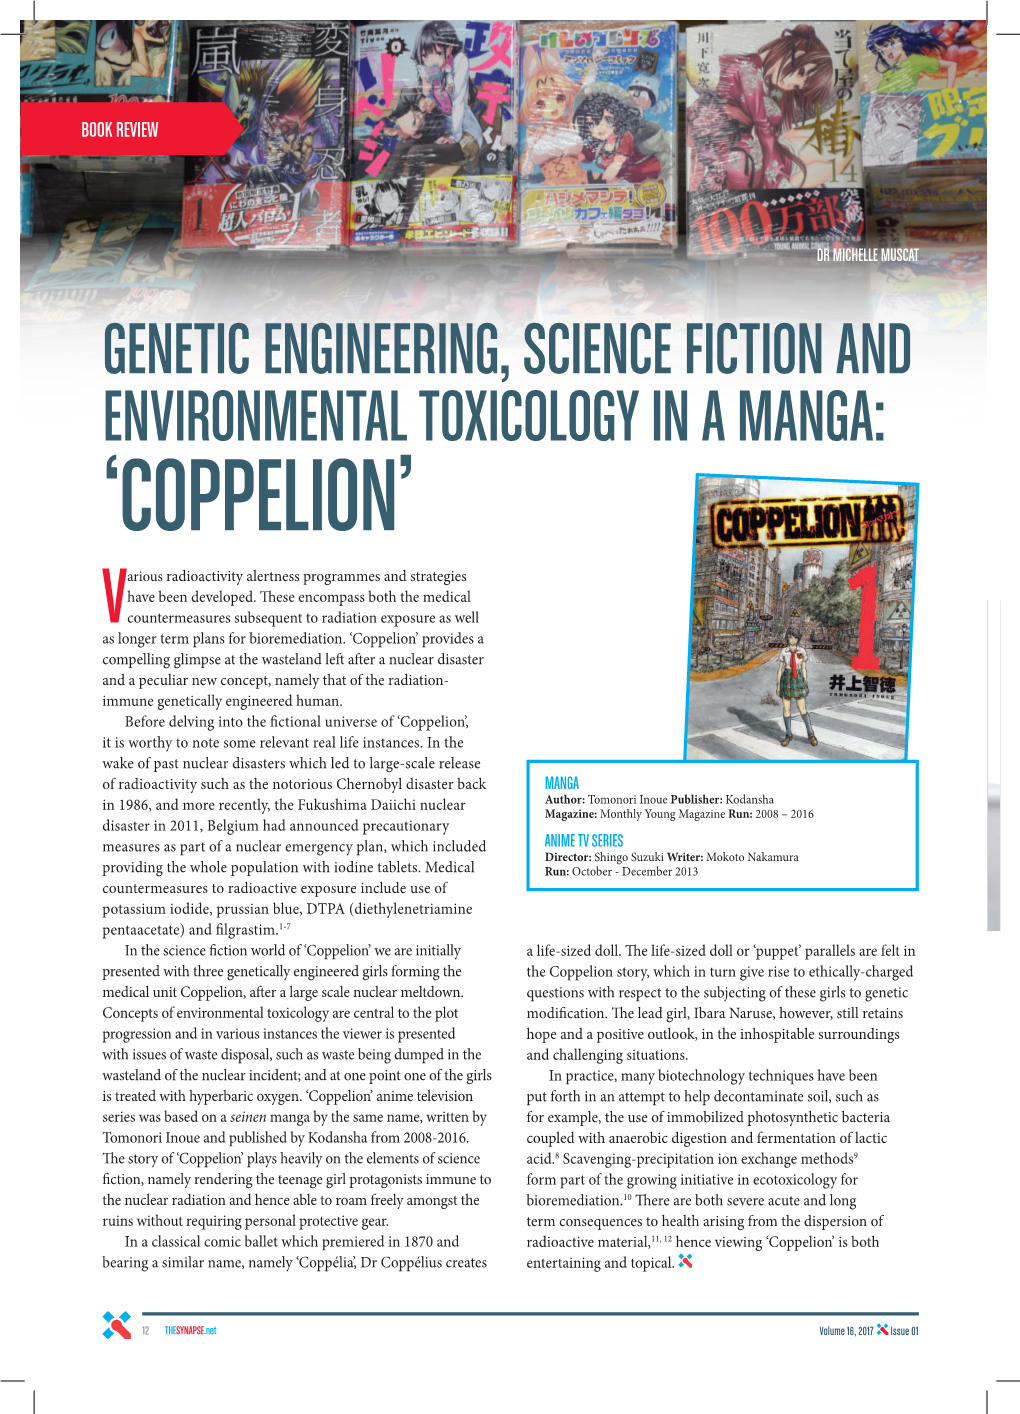 Genetic Engineering, Science Fiction and Environmental Toxicology in a Manga: ‘Coppelion’